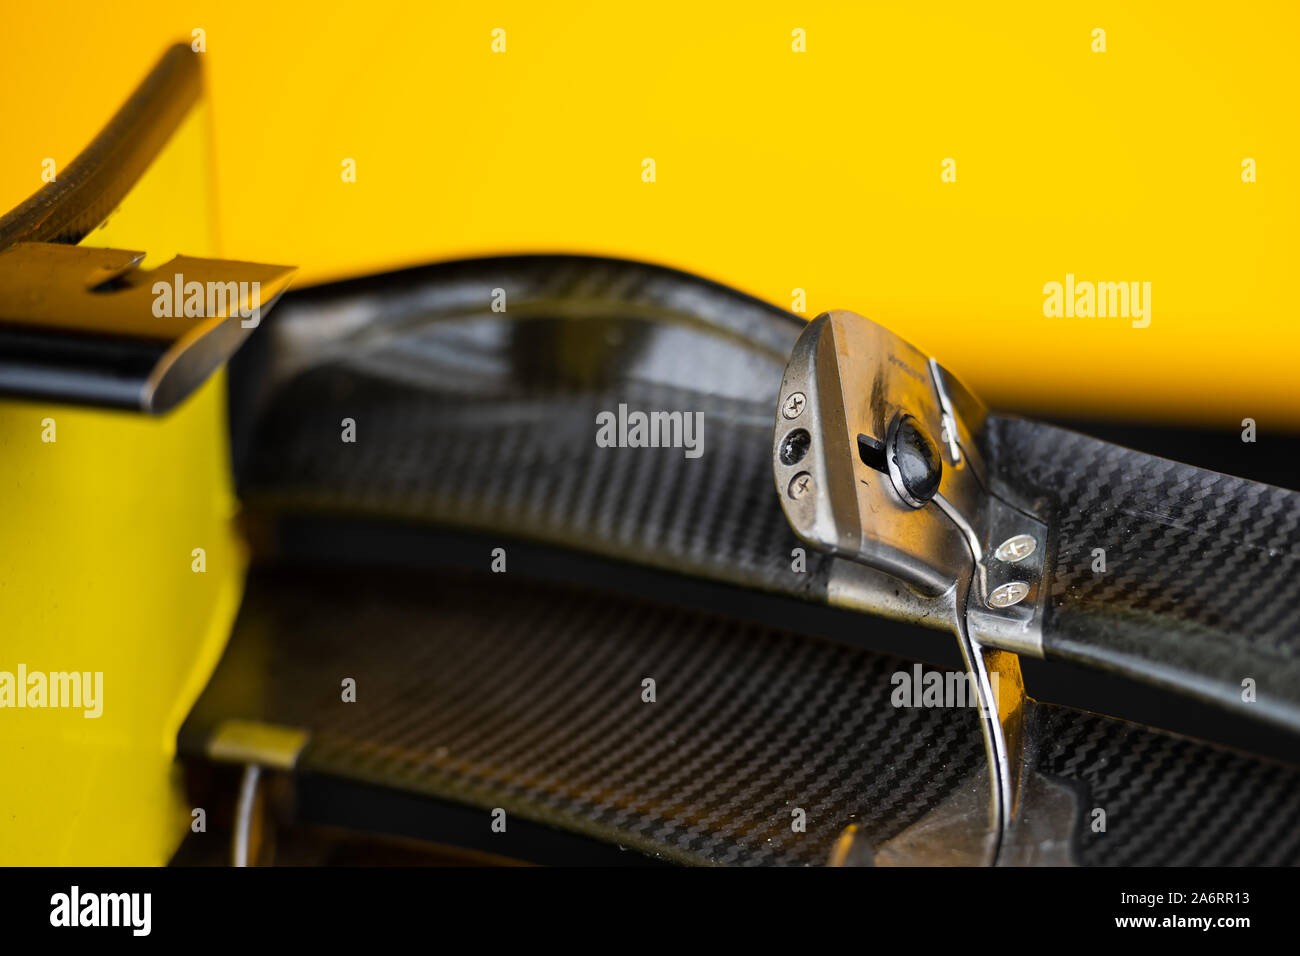 Italy/Monza - 07/09/2019 - An aero detail on the car of #27 Nico Hulkenberg (GER, Renault Sport F1 Team, R.S. 19) during FP3 ahead of Qualifying for t Stock Photo